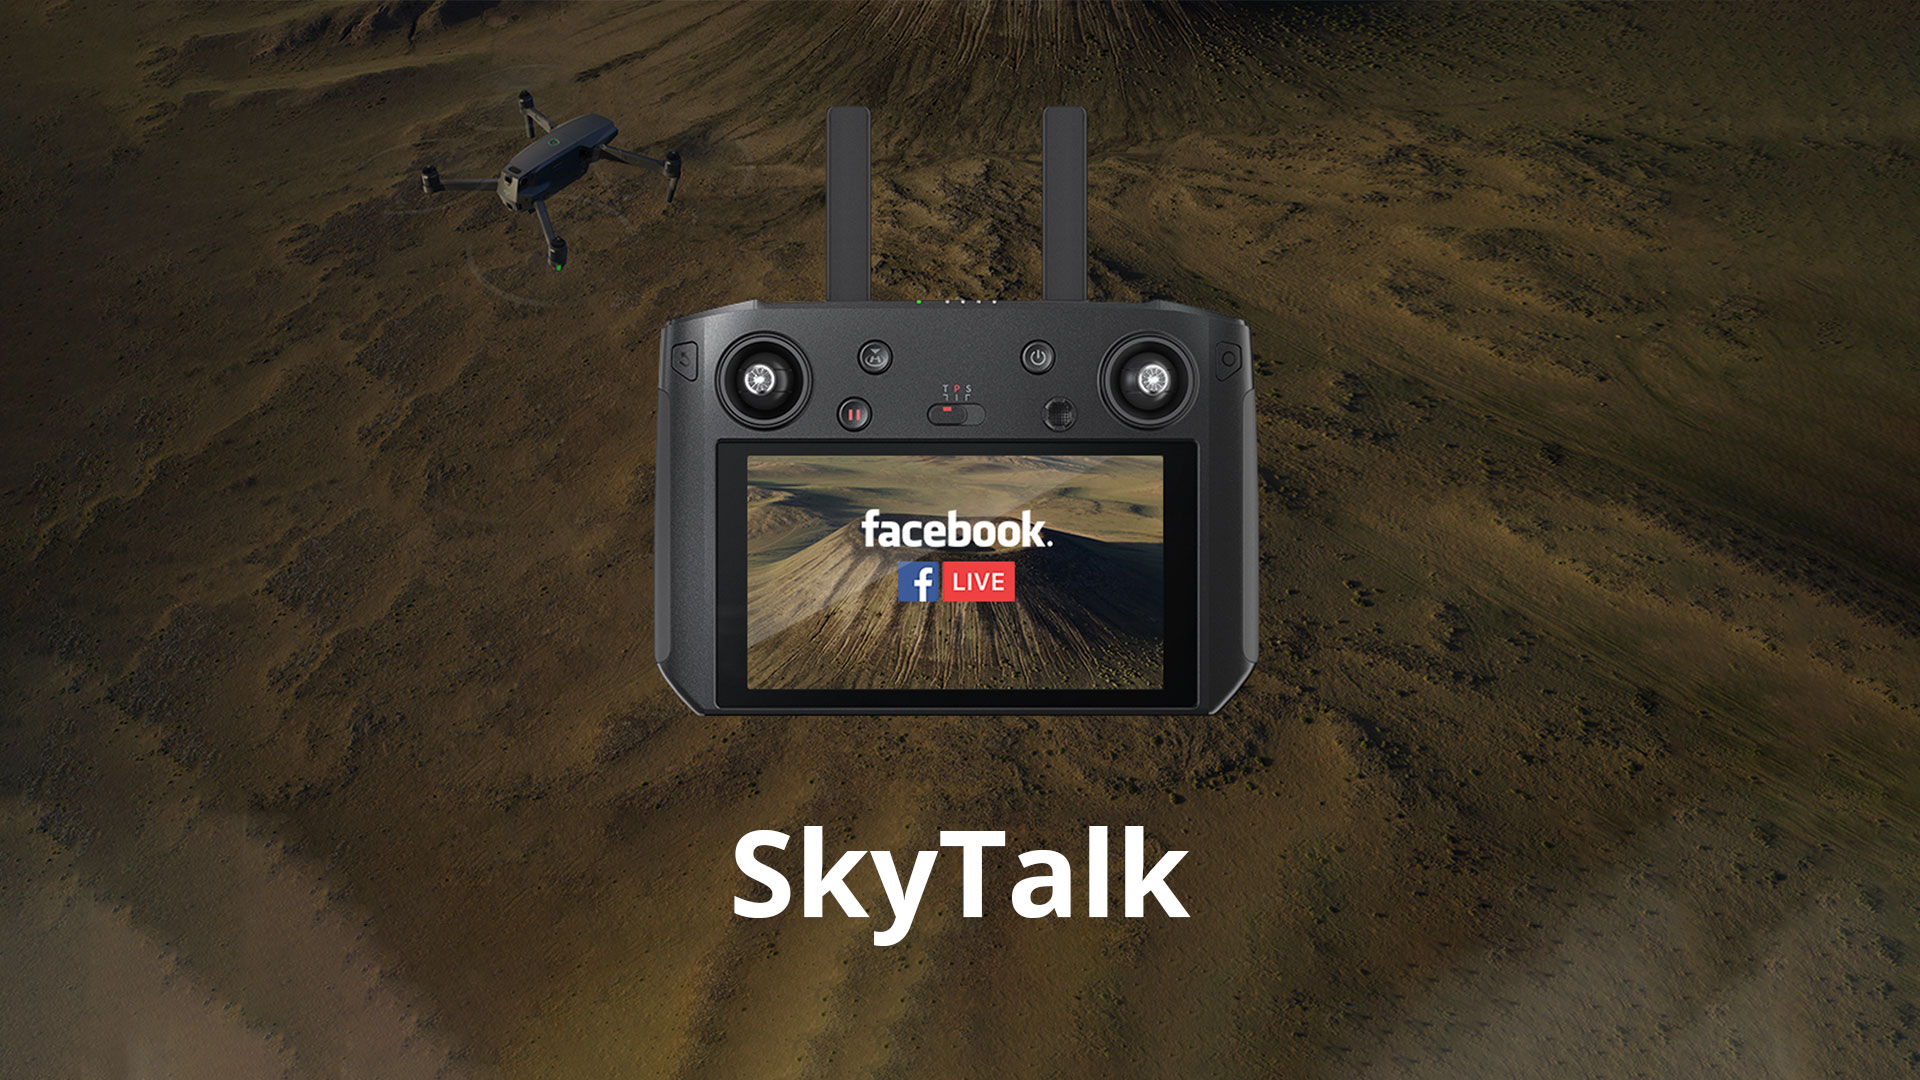 The new SkyTalk feature